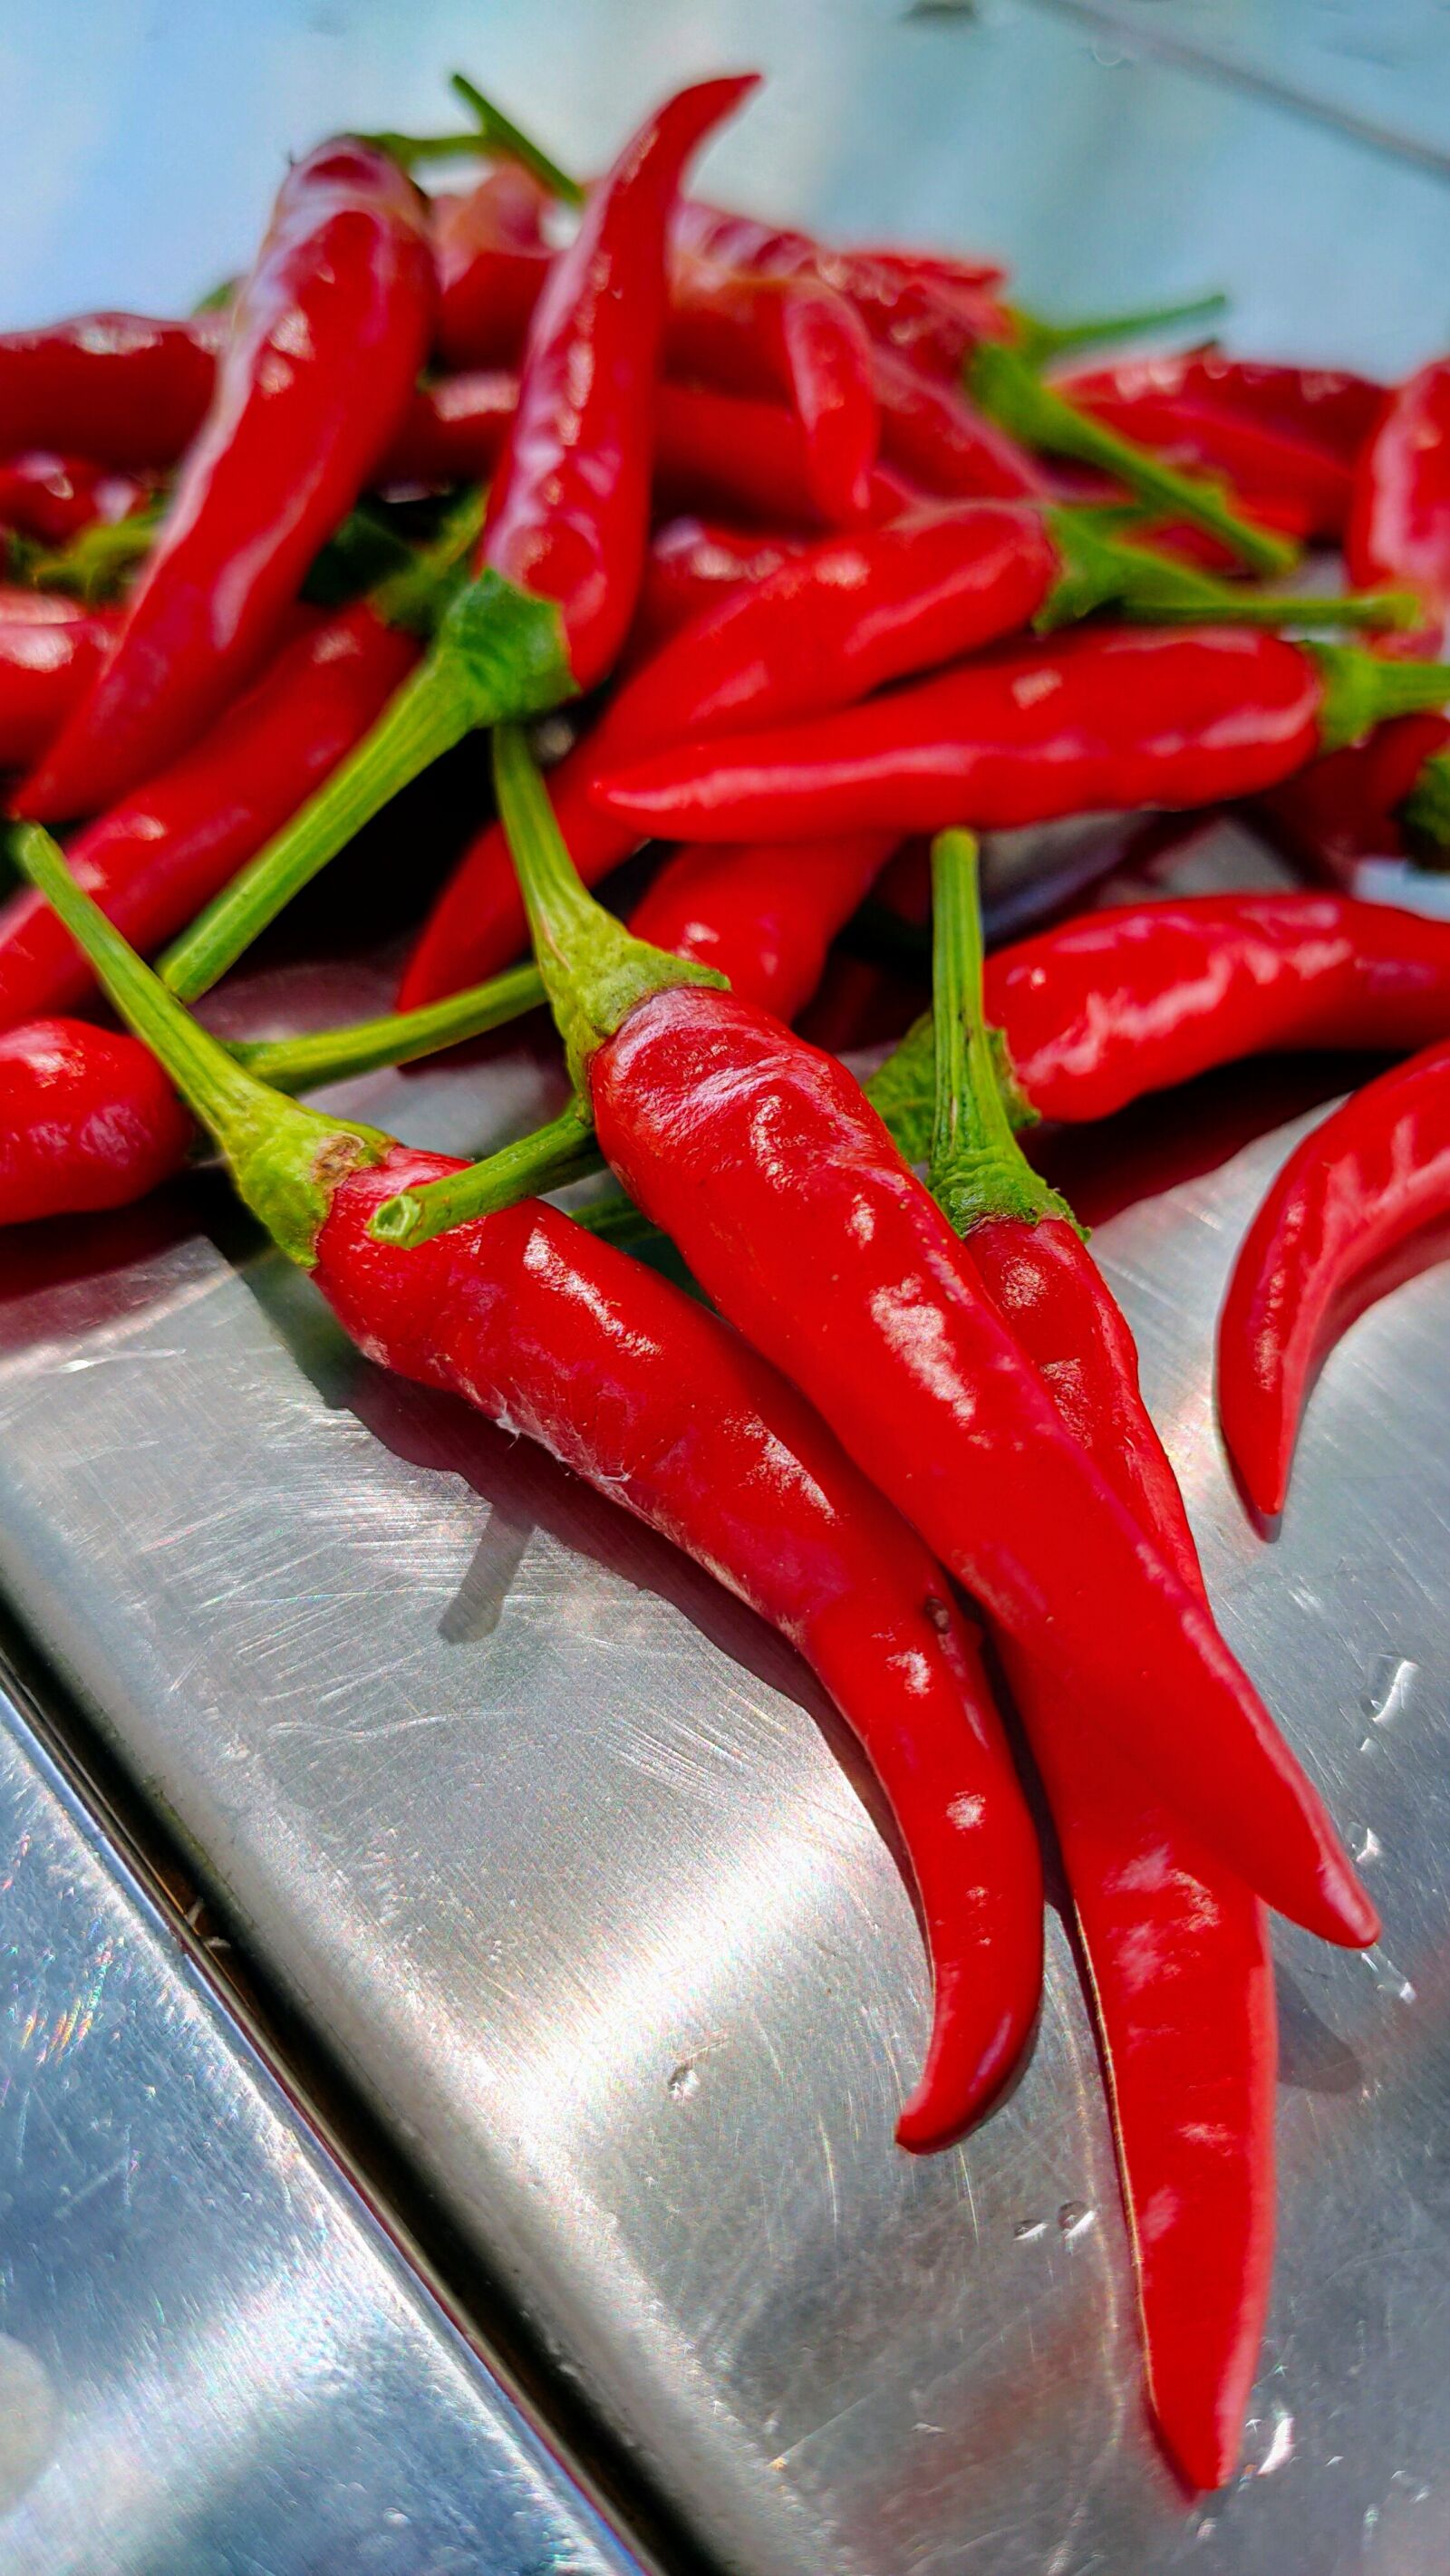 OPPO RENO2 sample photo. Red pepper, plant, red photography